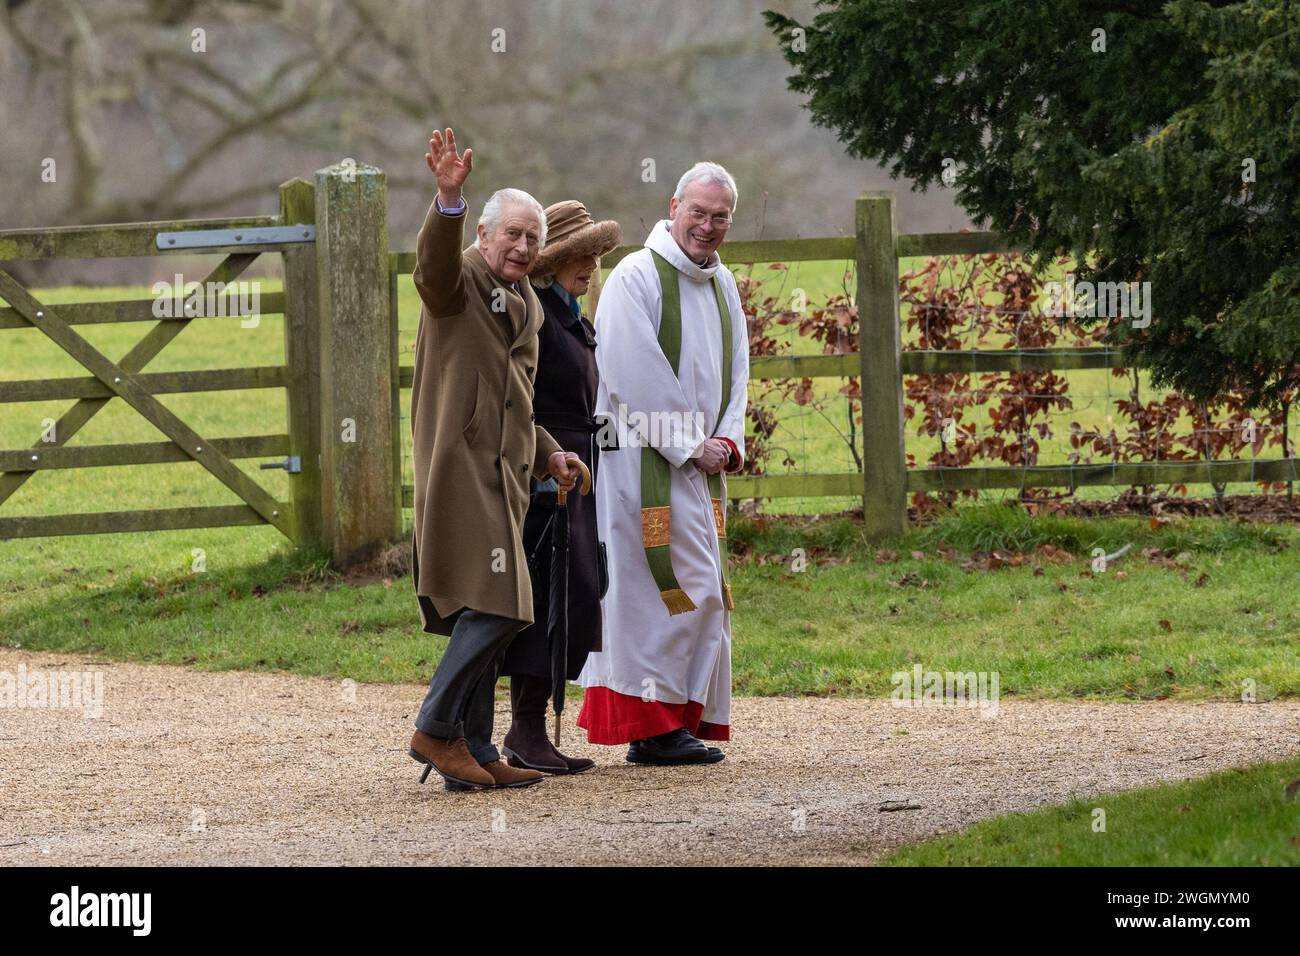 Pic dated Feb 4th shows  King Charles and Queen Camilla at church in Sandringham,Norfolk before cancer diagnosis with Reverend Canon Paul Williams. Stock Photo